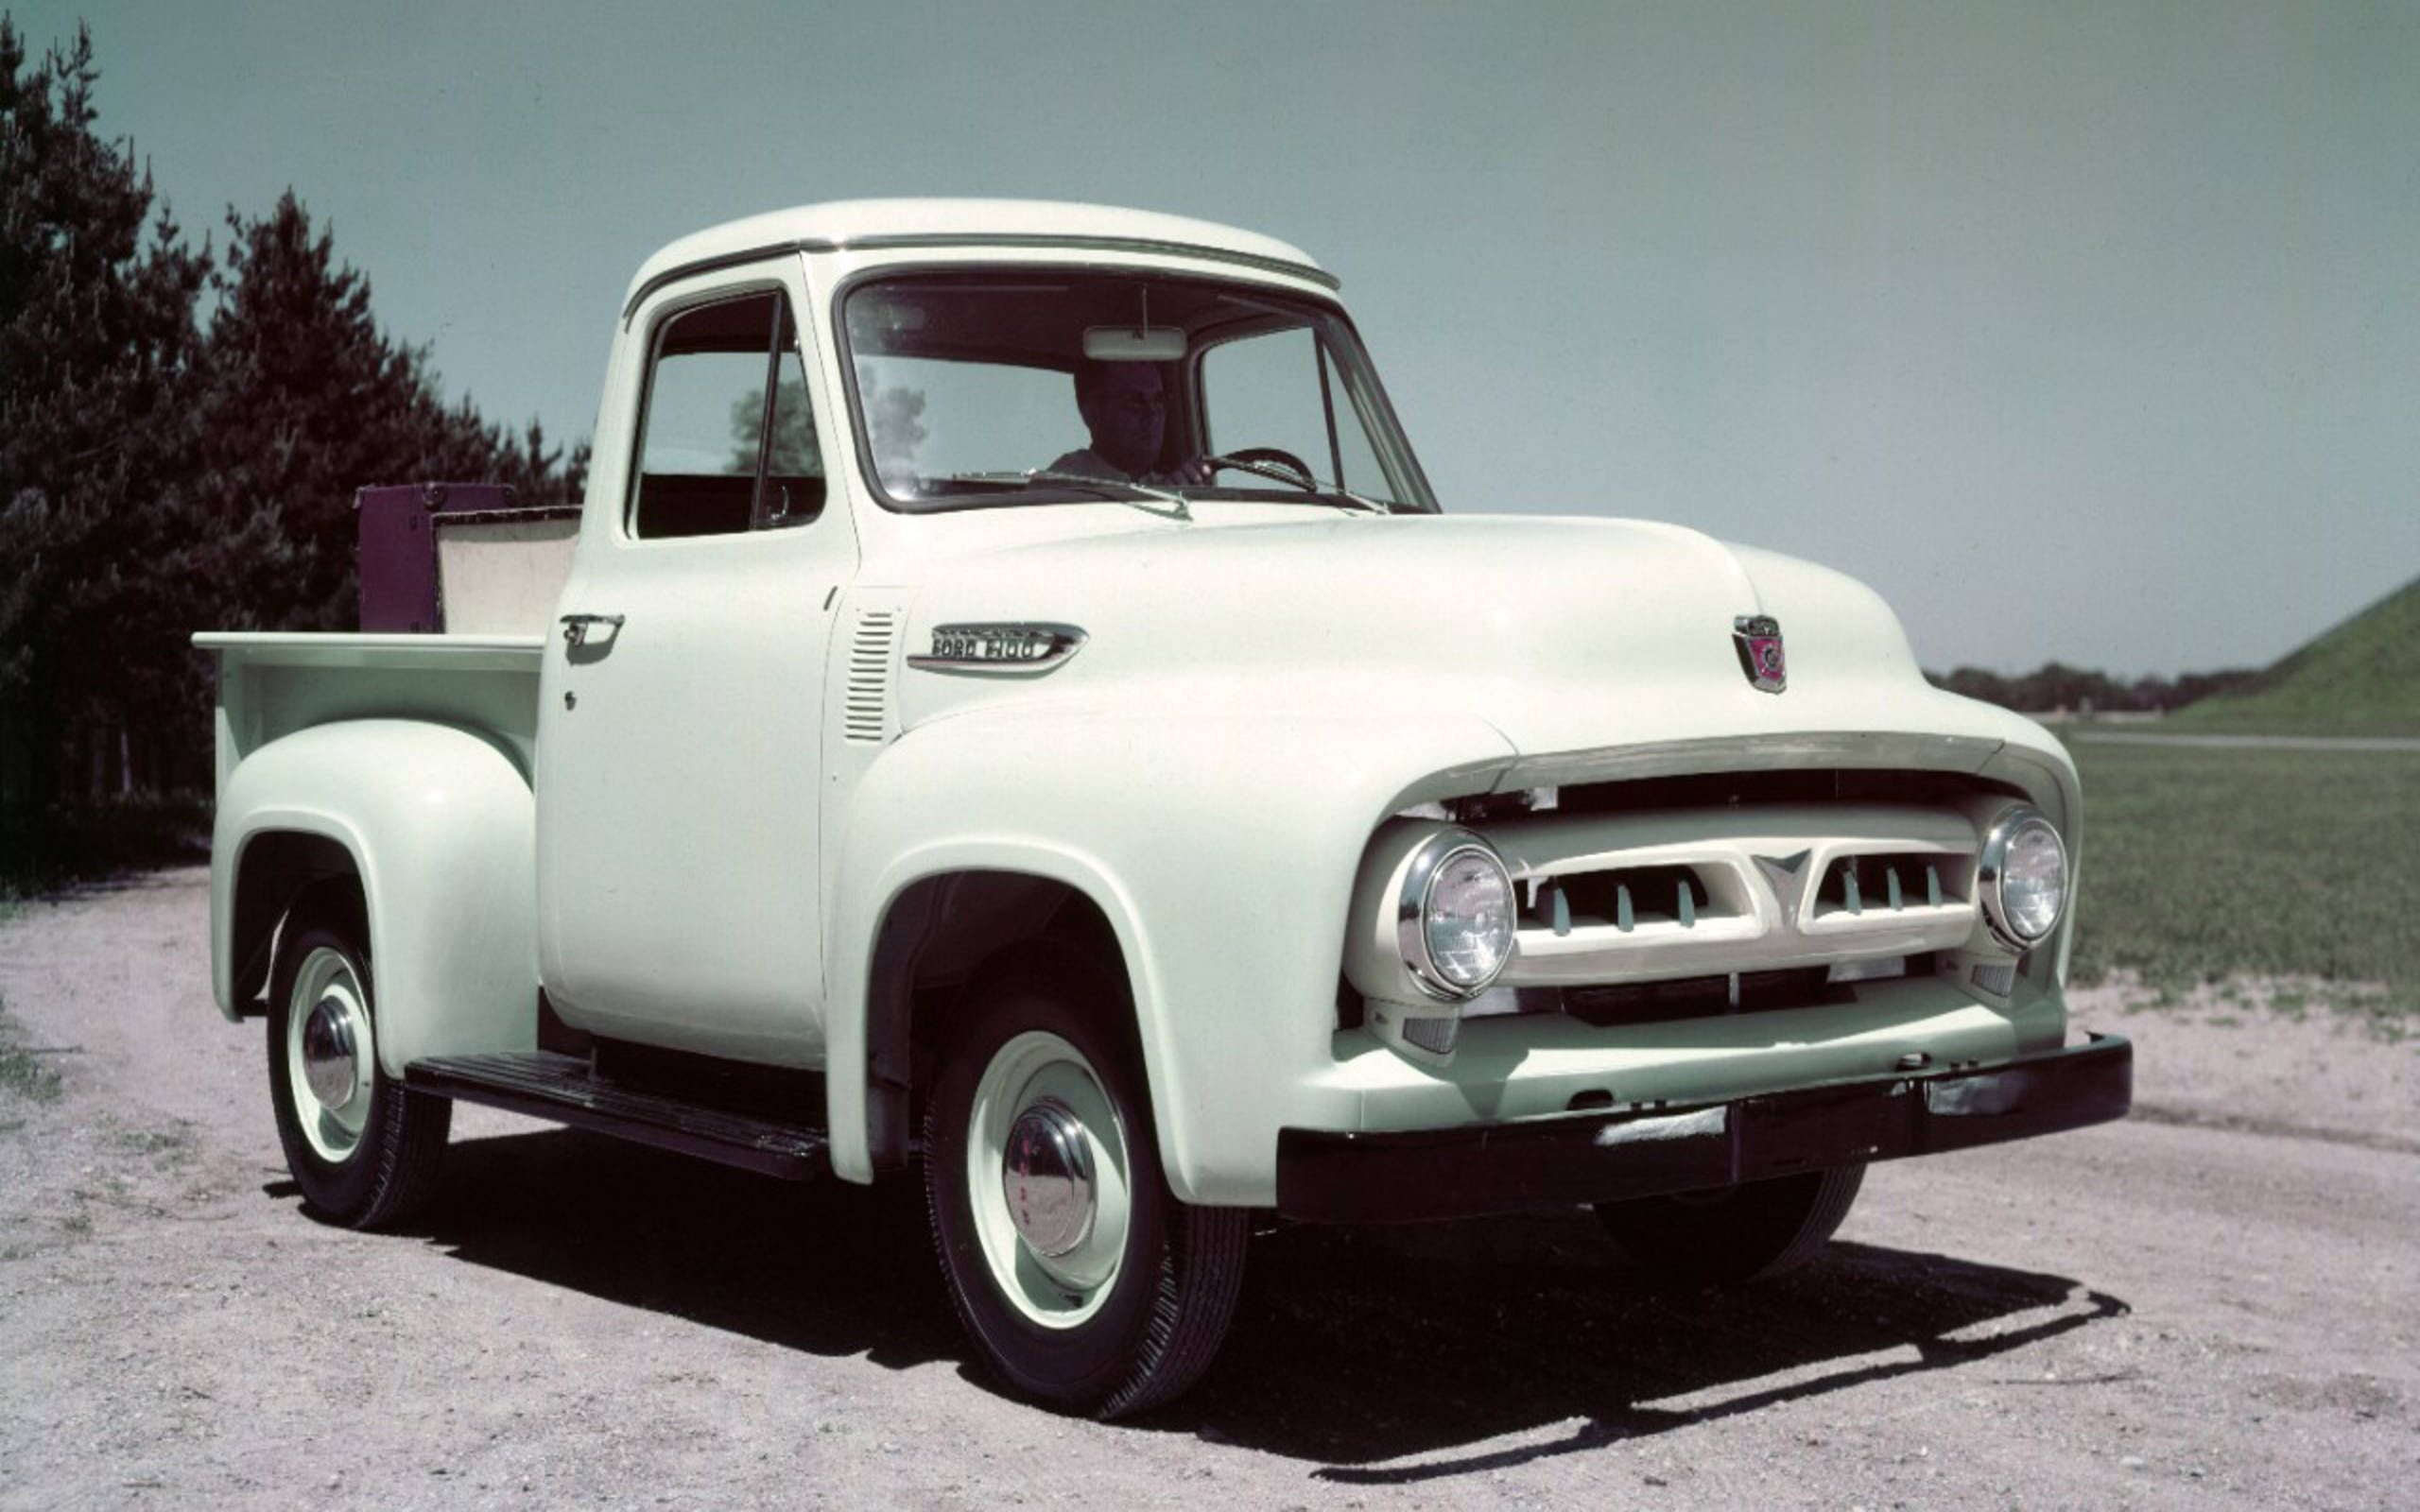 Today marks the 100th birthday of the Ford pickup truck